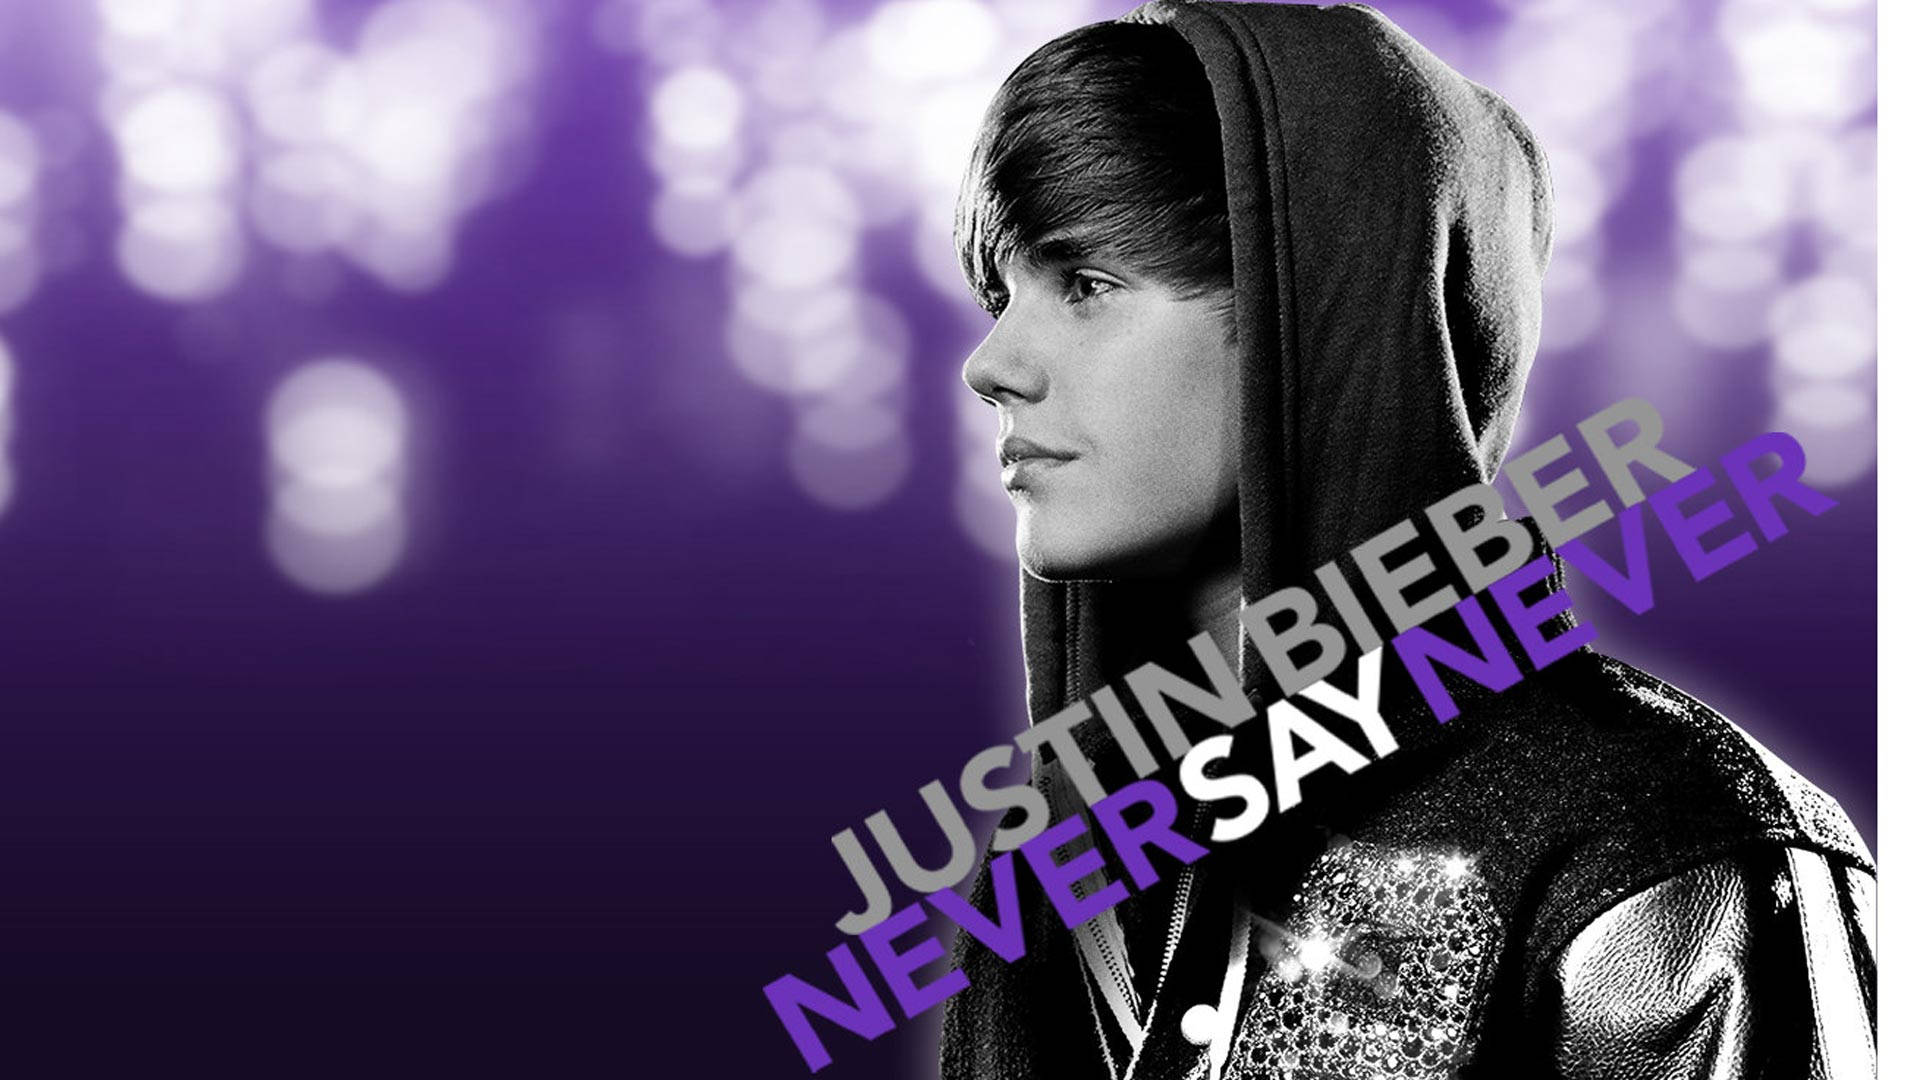 Justin Bieber in the movie Never Say Never Wallpaper